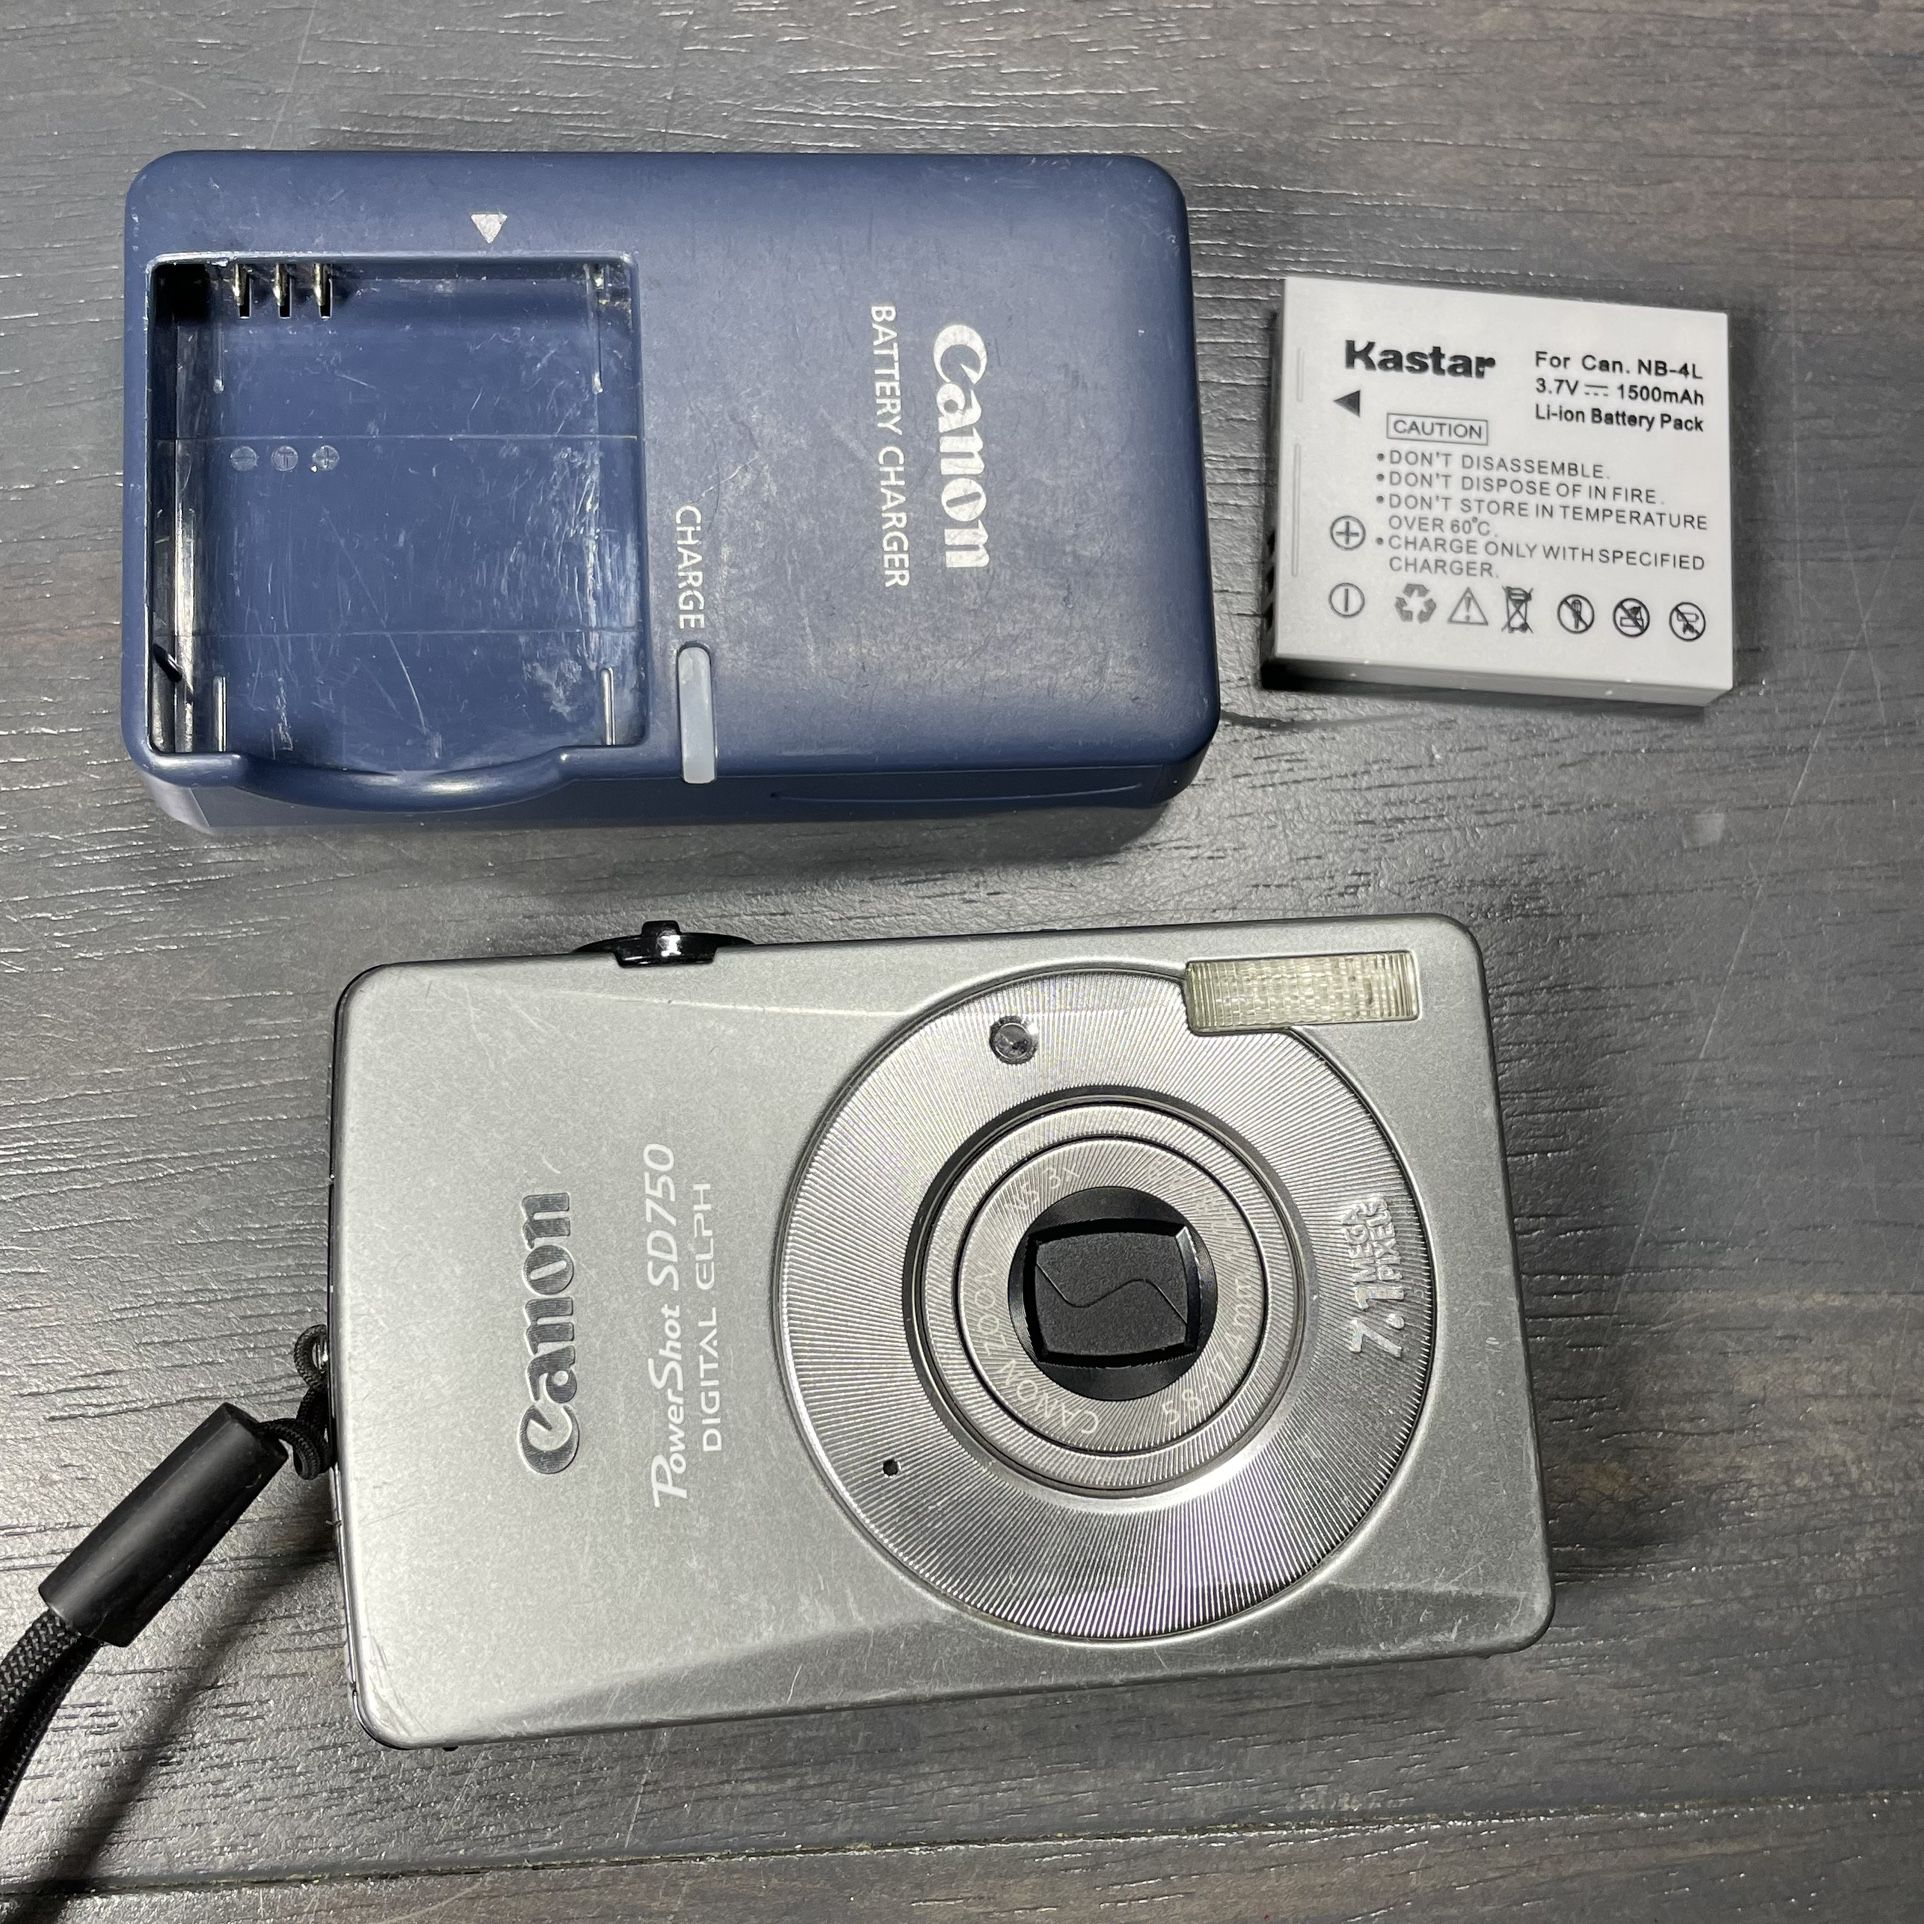 Canon PowerShot Digital ELPH SD750 Digital IXUS 75 7.1MP With Charger & Battery!  Check out my other cool listings!!!  (: I might have other items lik